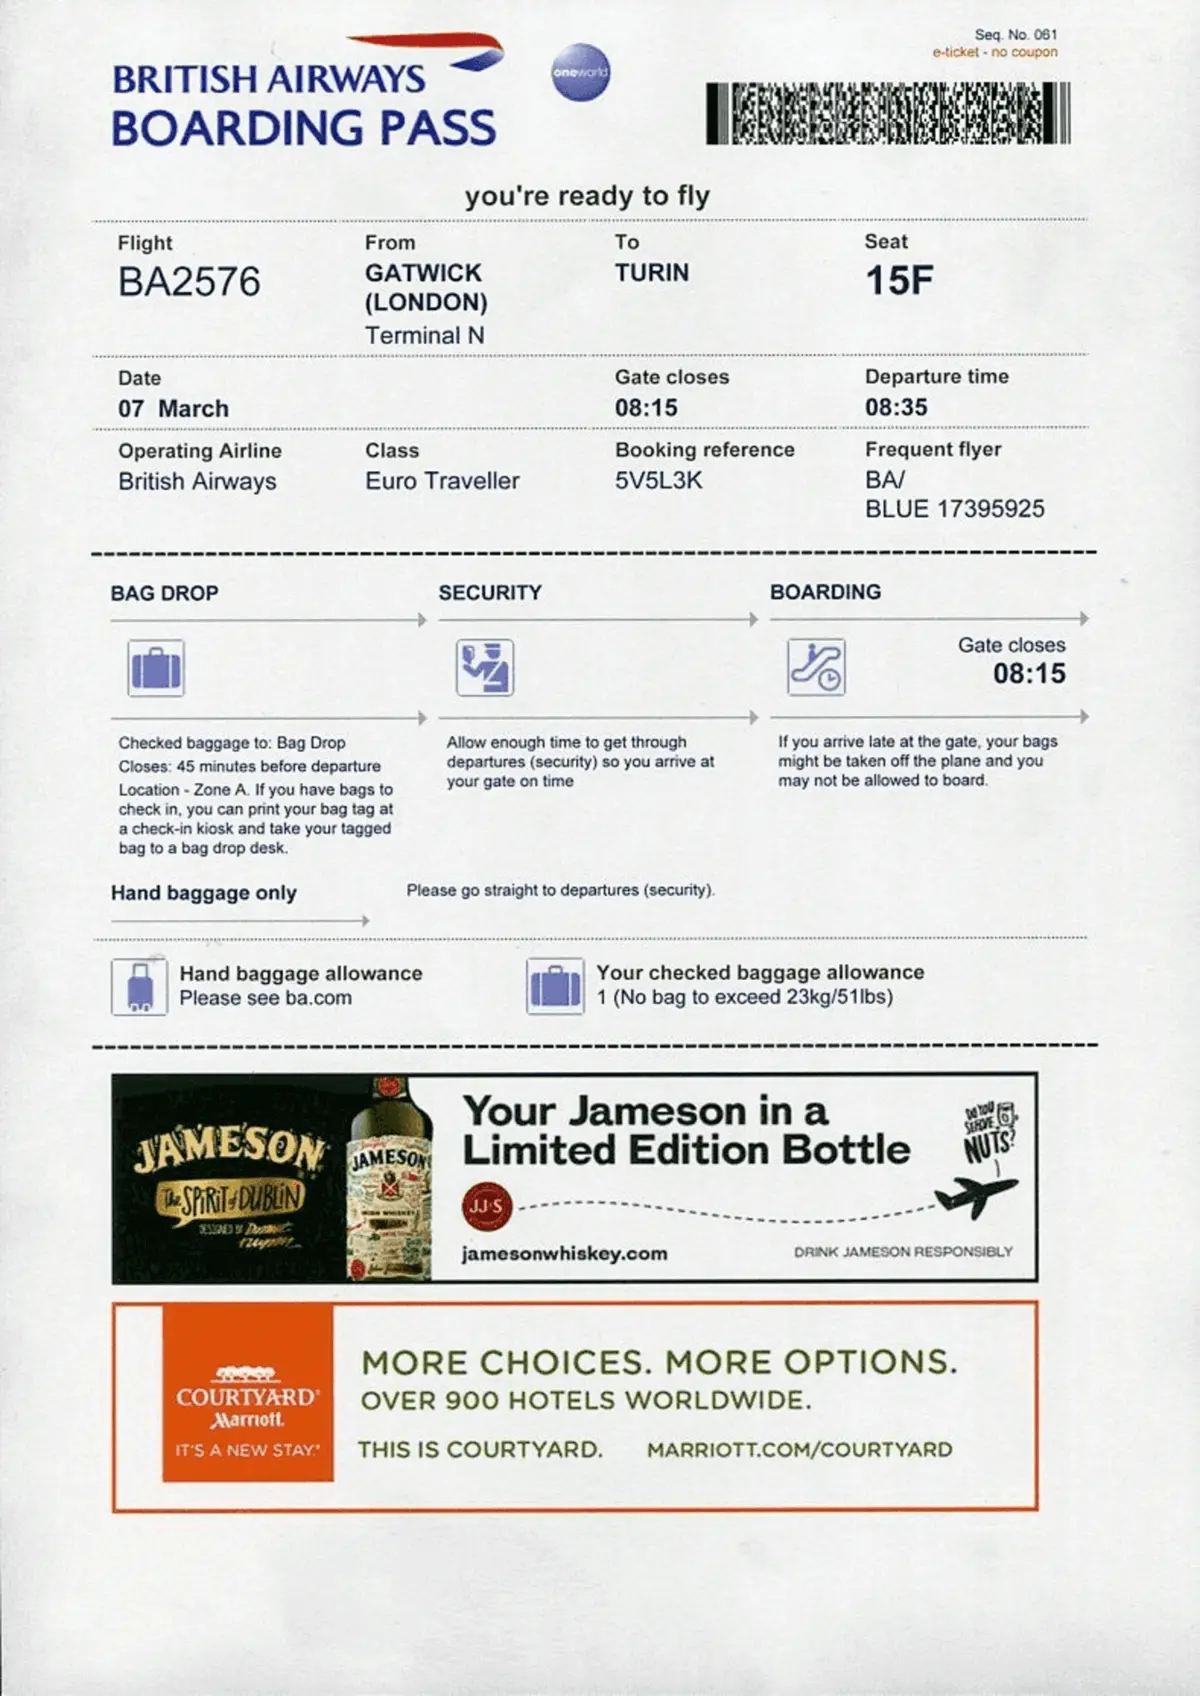 Houston Airport Iah Advertising Boarding Passes A1